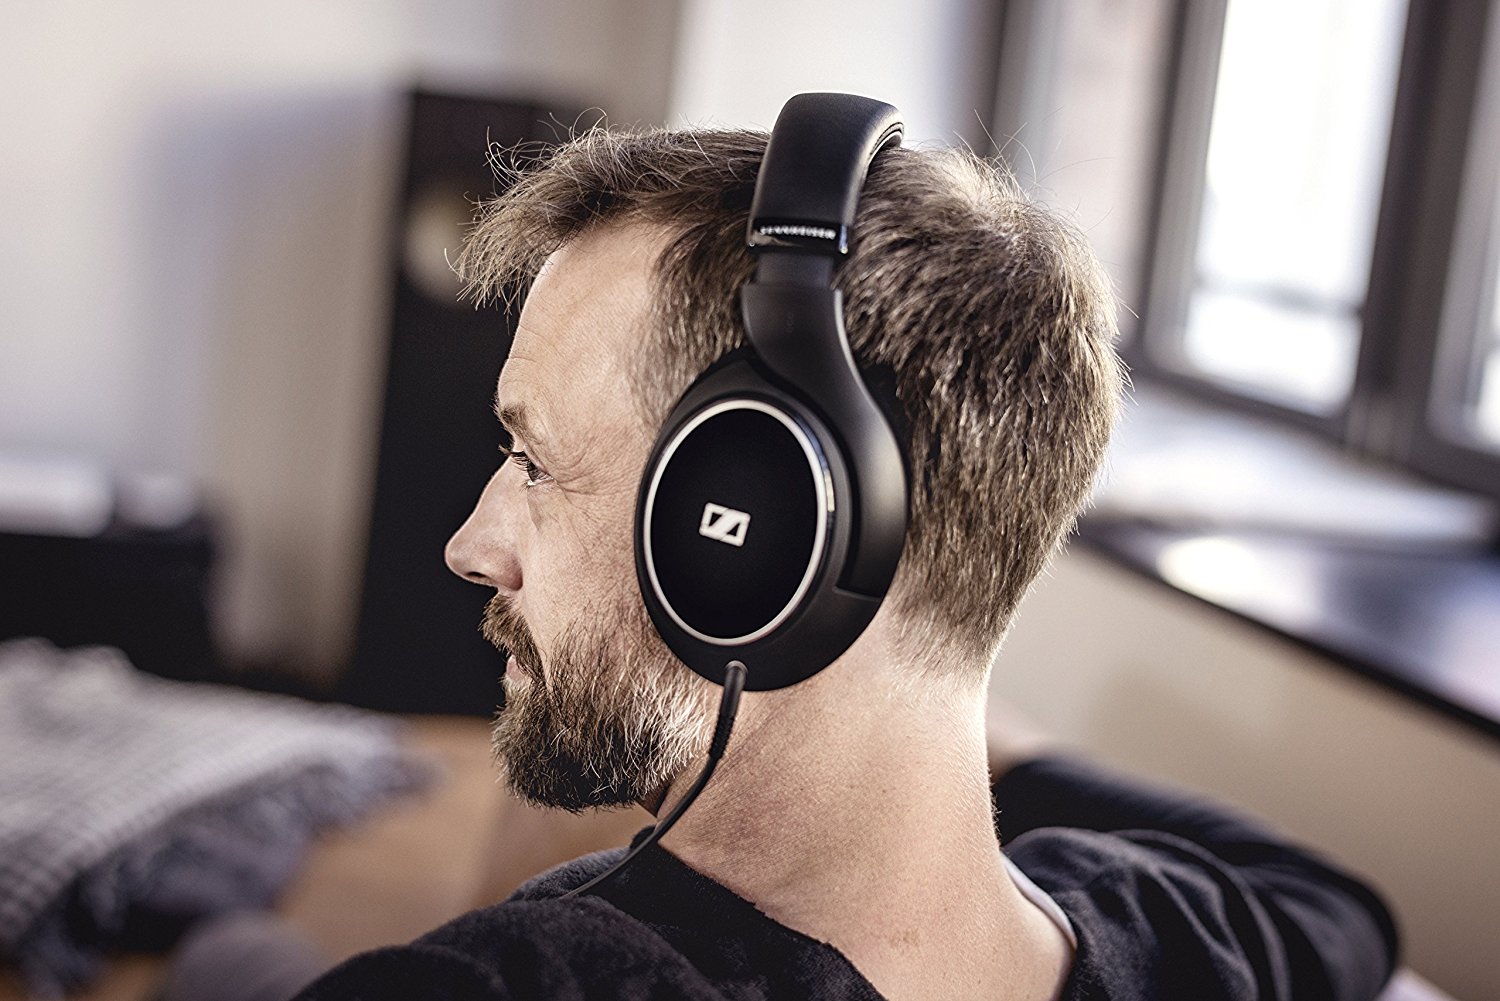 Top 9 Best Closed Back Headphones Under $200 in 2021 - Reviews and Comparison